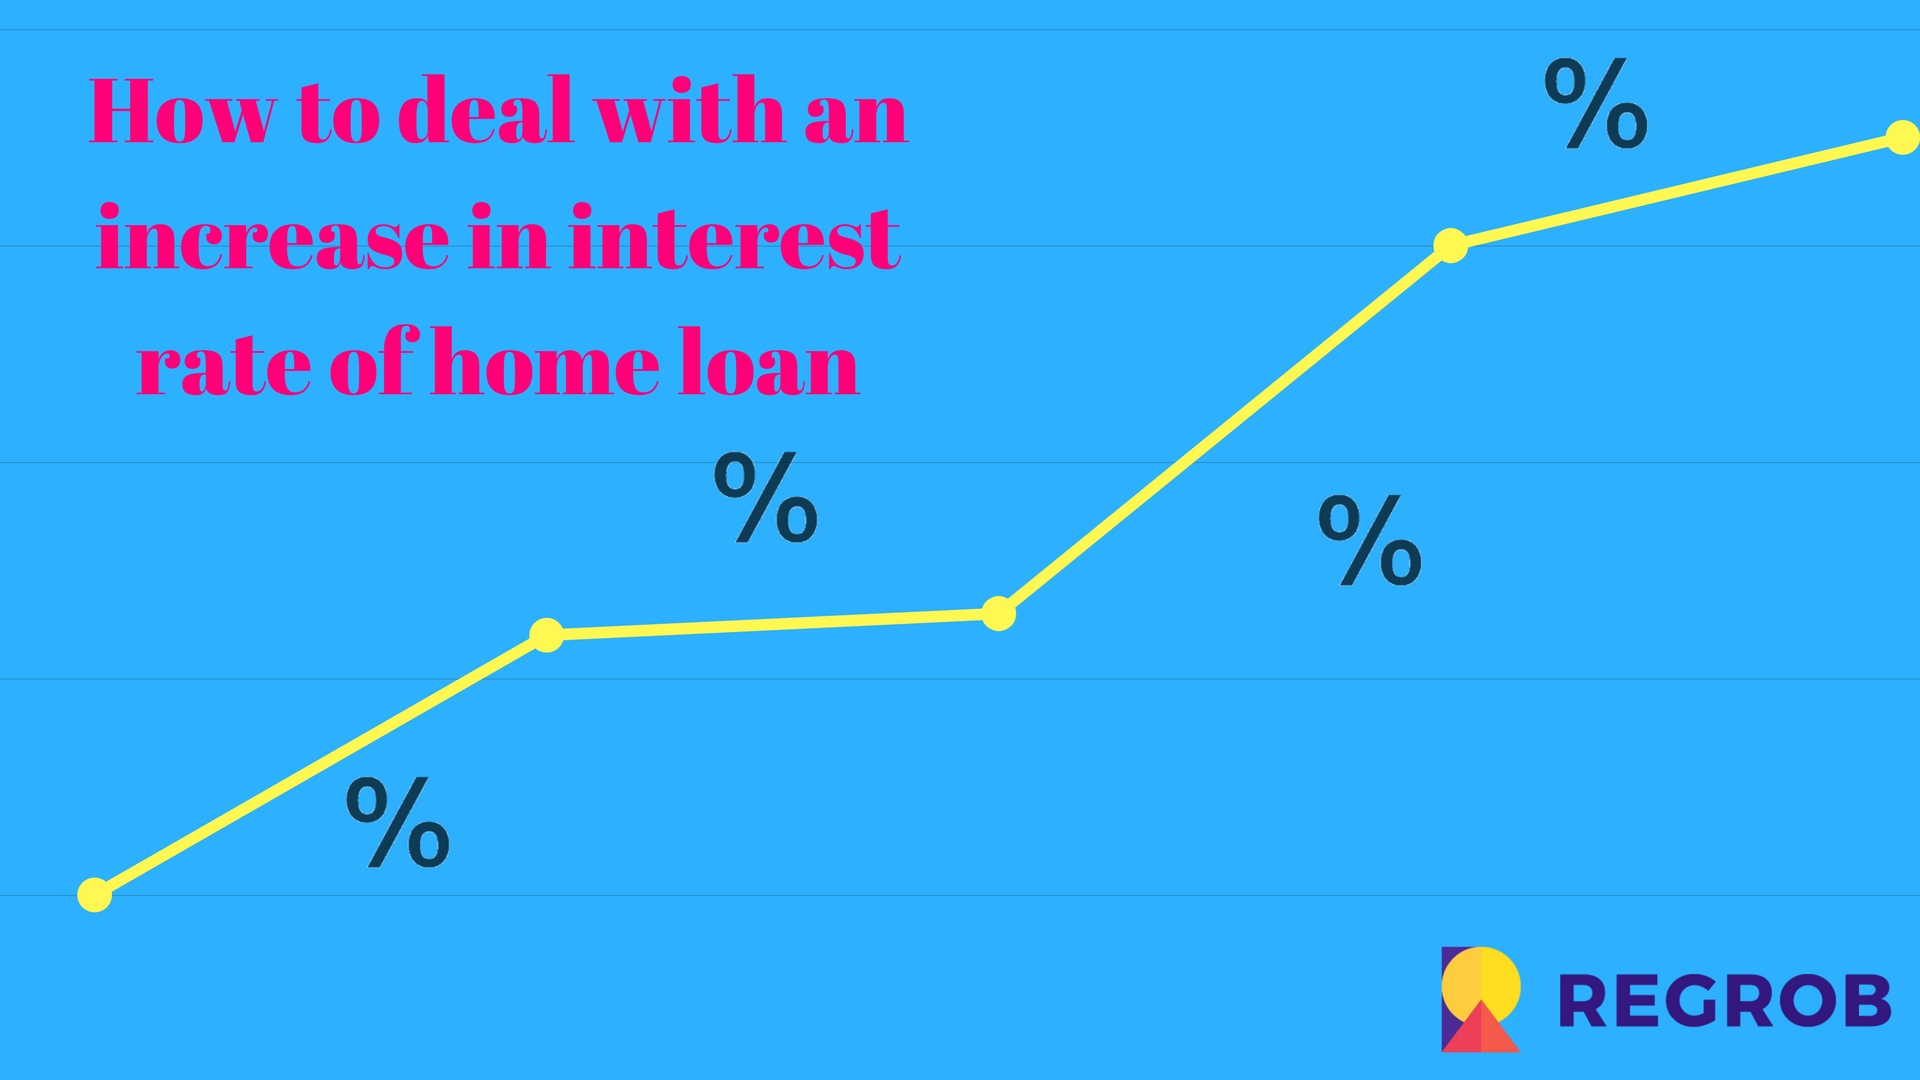 How to deal with an increased interest rates of home loan